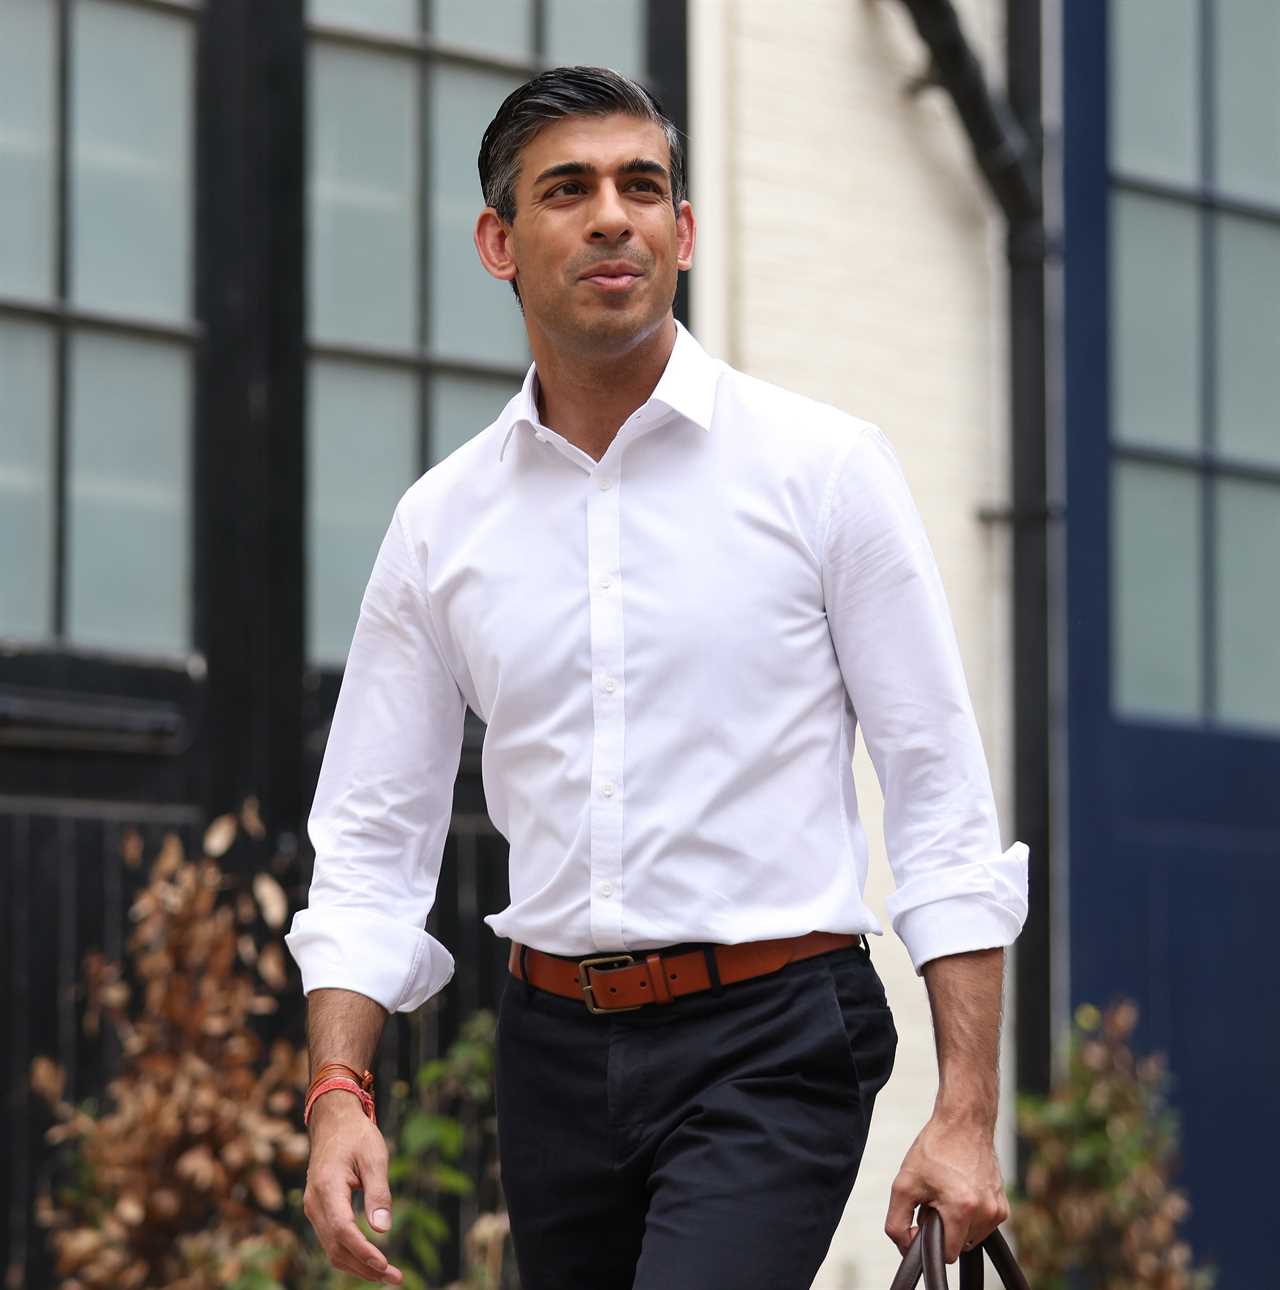 Rishi Sunak hit by sabotage campaign to try to scupper his chance of becoming PM